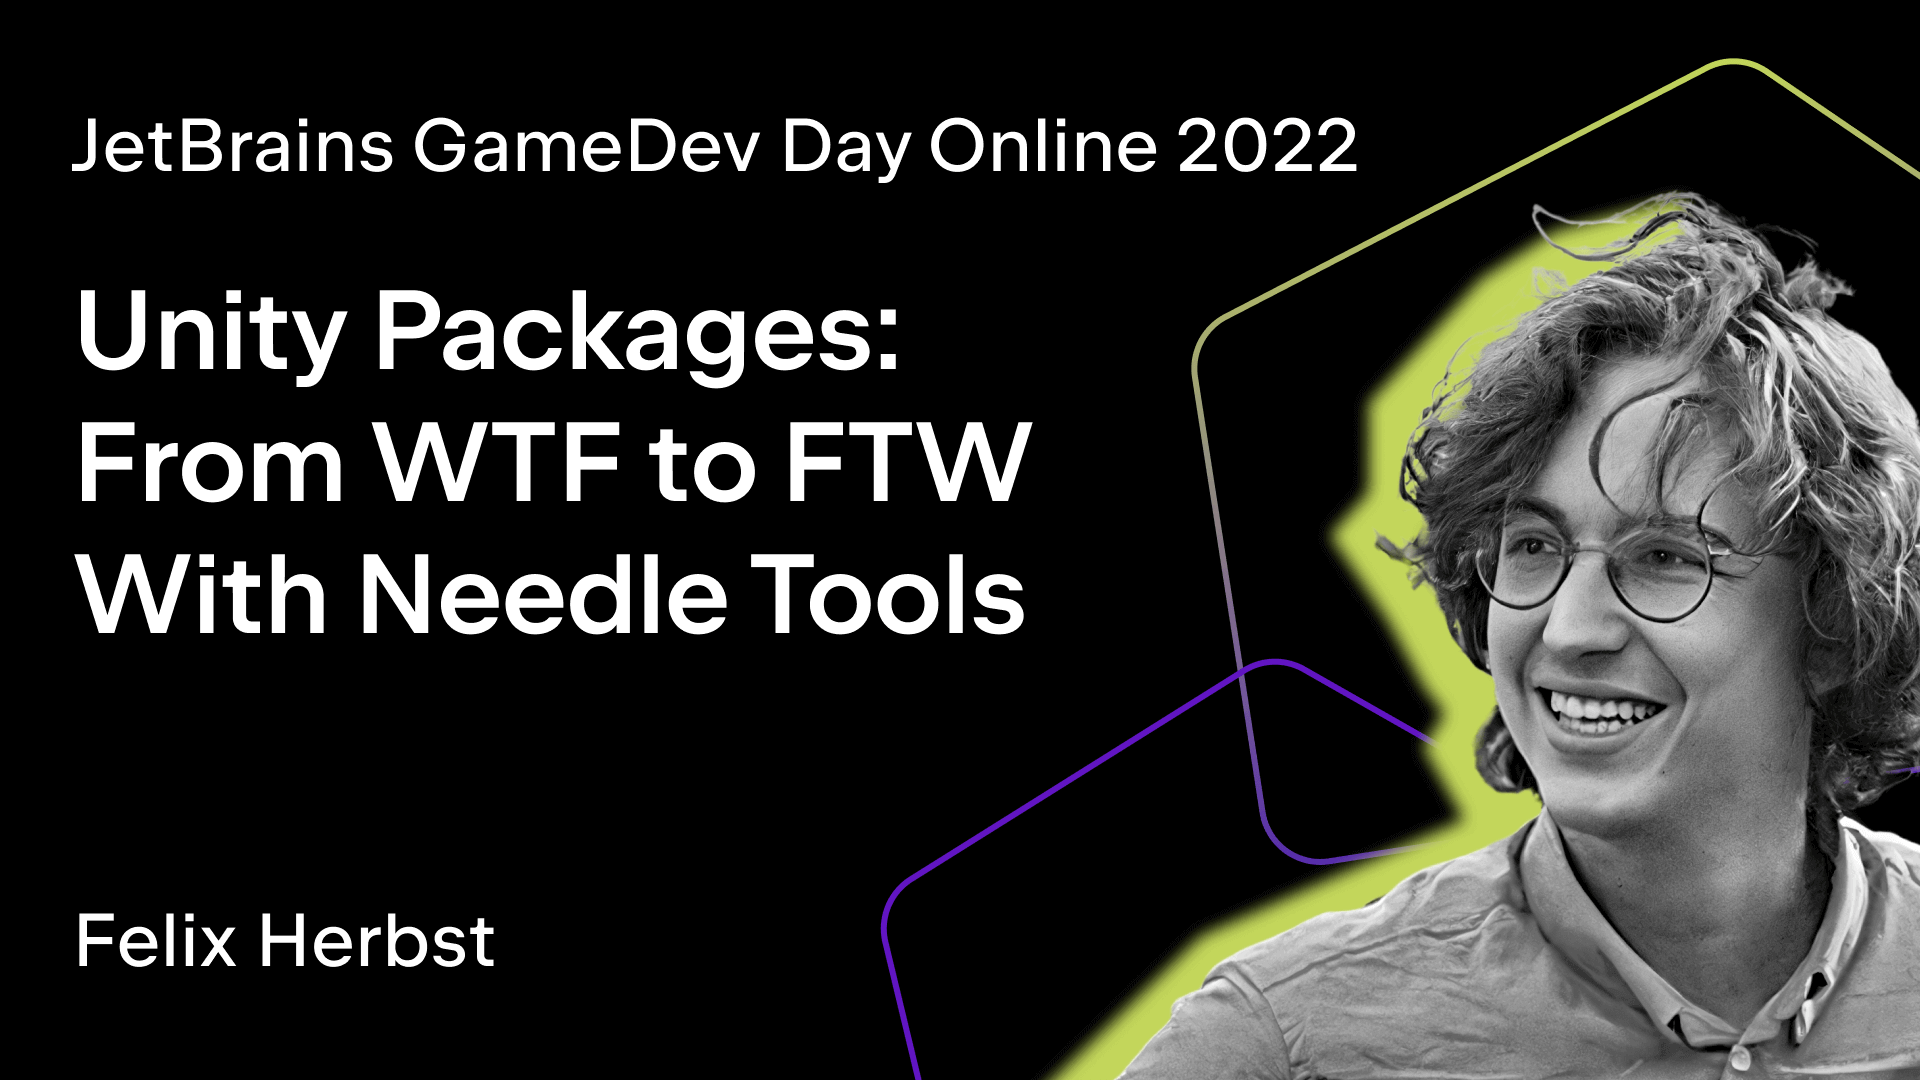 Unity Packages: From WTF to FTW with Needle Tools